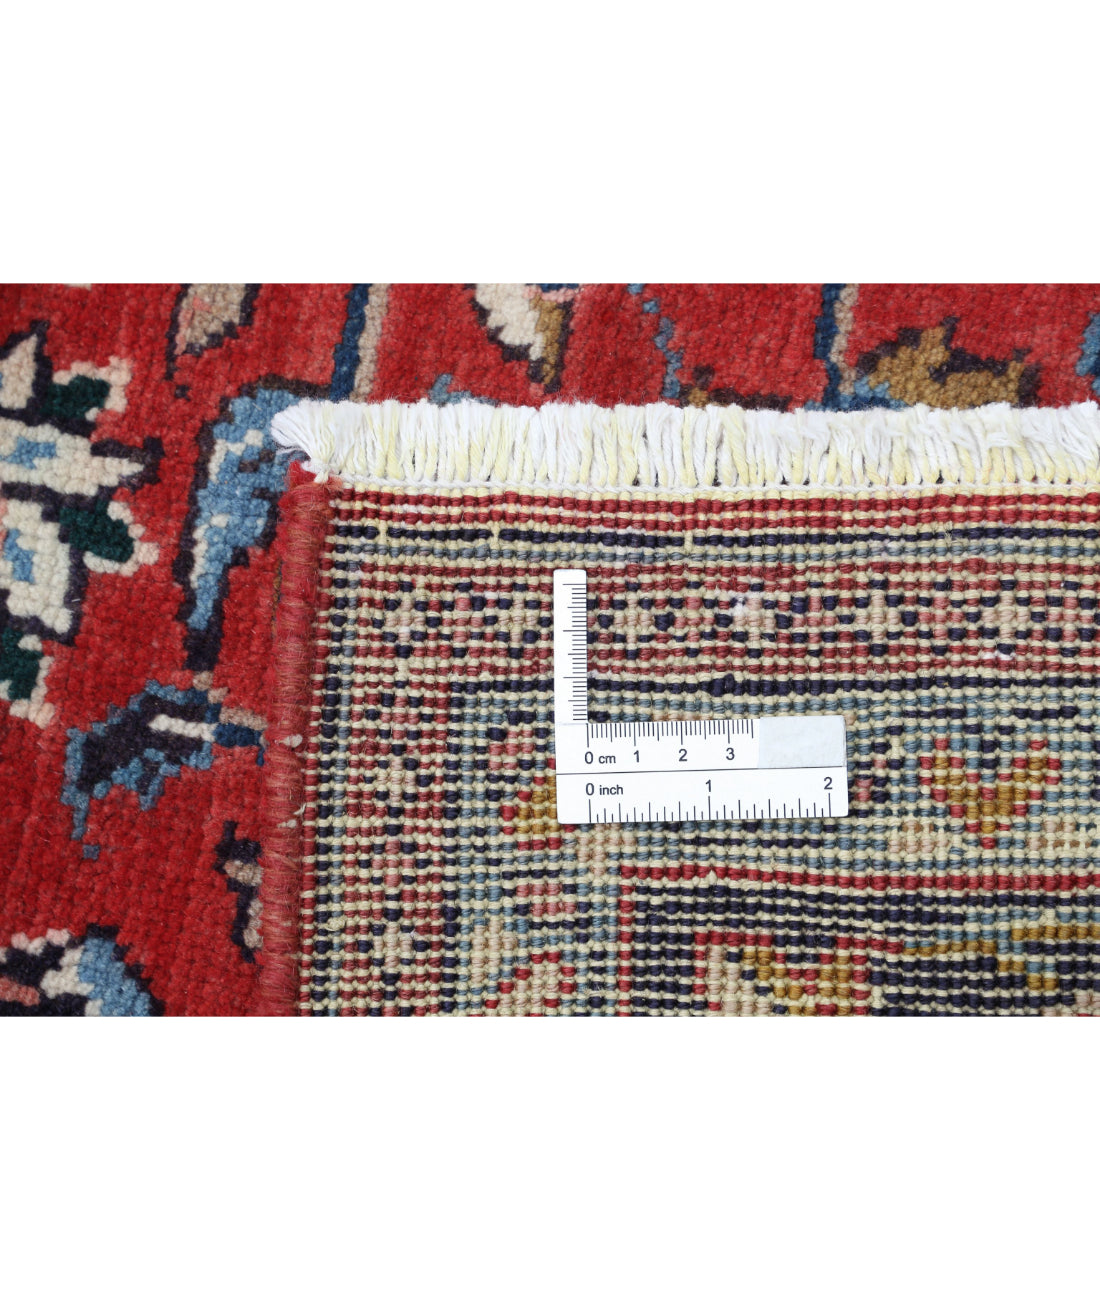 Hand Knotted Persian Mahal Wool Rug - 7'1'' x 10'6'' 7'1'' x 10'6'' (213 X 315) / Red / Black